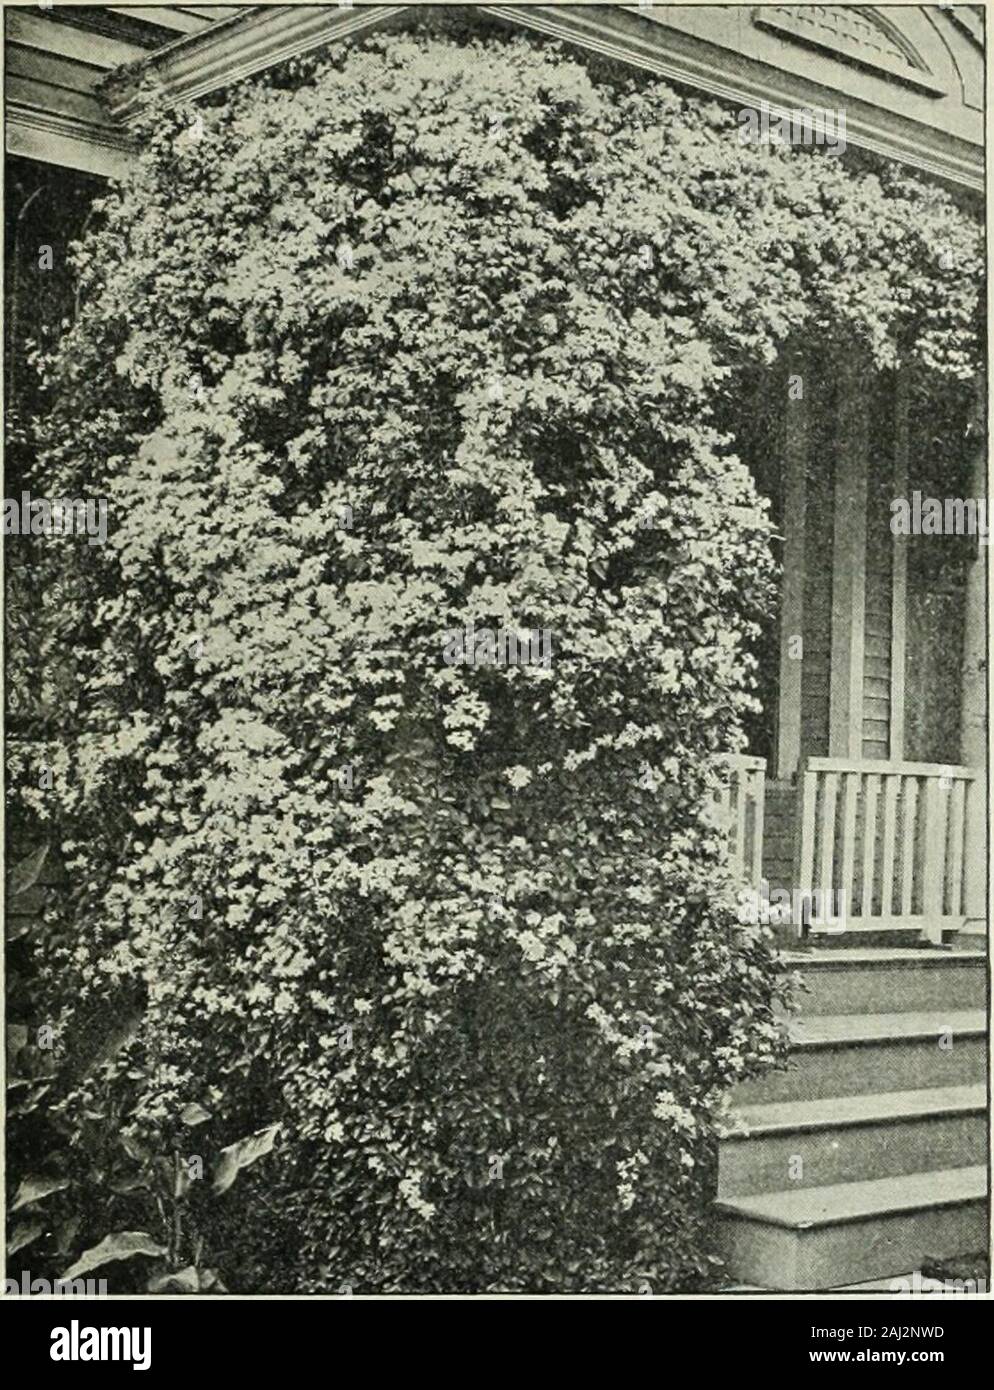 Vick's garden and floral guide . CALIFORNIA PRIVET James Vicks Sons, Seedmen, Rochester, N. Y. Hardy Climbers 73. CLEMATIS PAXICULATA AMPELOPSIS Veitchii (Japanese or Boston Ivy.) This hardy variety clings firmly tothe side of a house or wall, and will soon form a perfect mass of foliage. Theleaves overlap with wonderful regularity. In autumn this beautiful climberassumes its greatest beauty, changing until it is a glowing mass of the brightestshades of crimson, scarlet, and orange. Hardy. Strong vines, 25 cents ; twofor 40 cents : dozen, $2.00. Quinquefolia, or Virginia Creeper. Sometimes cal Stock Photo